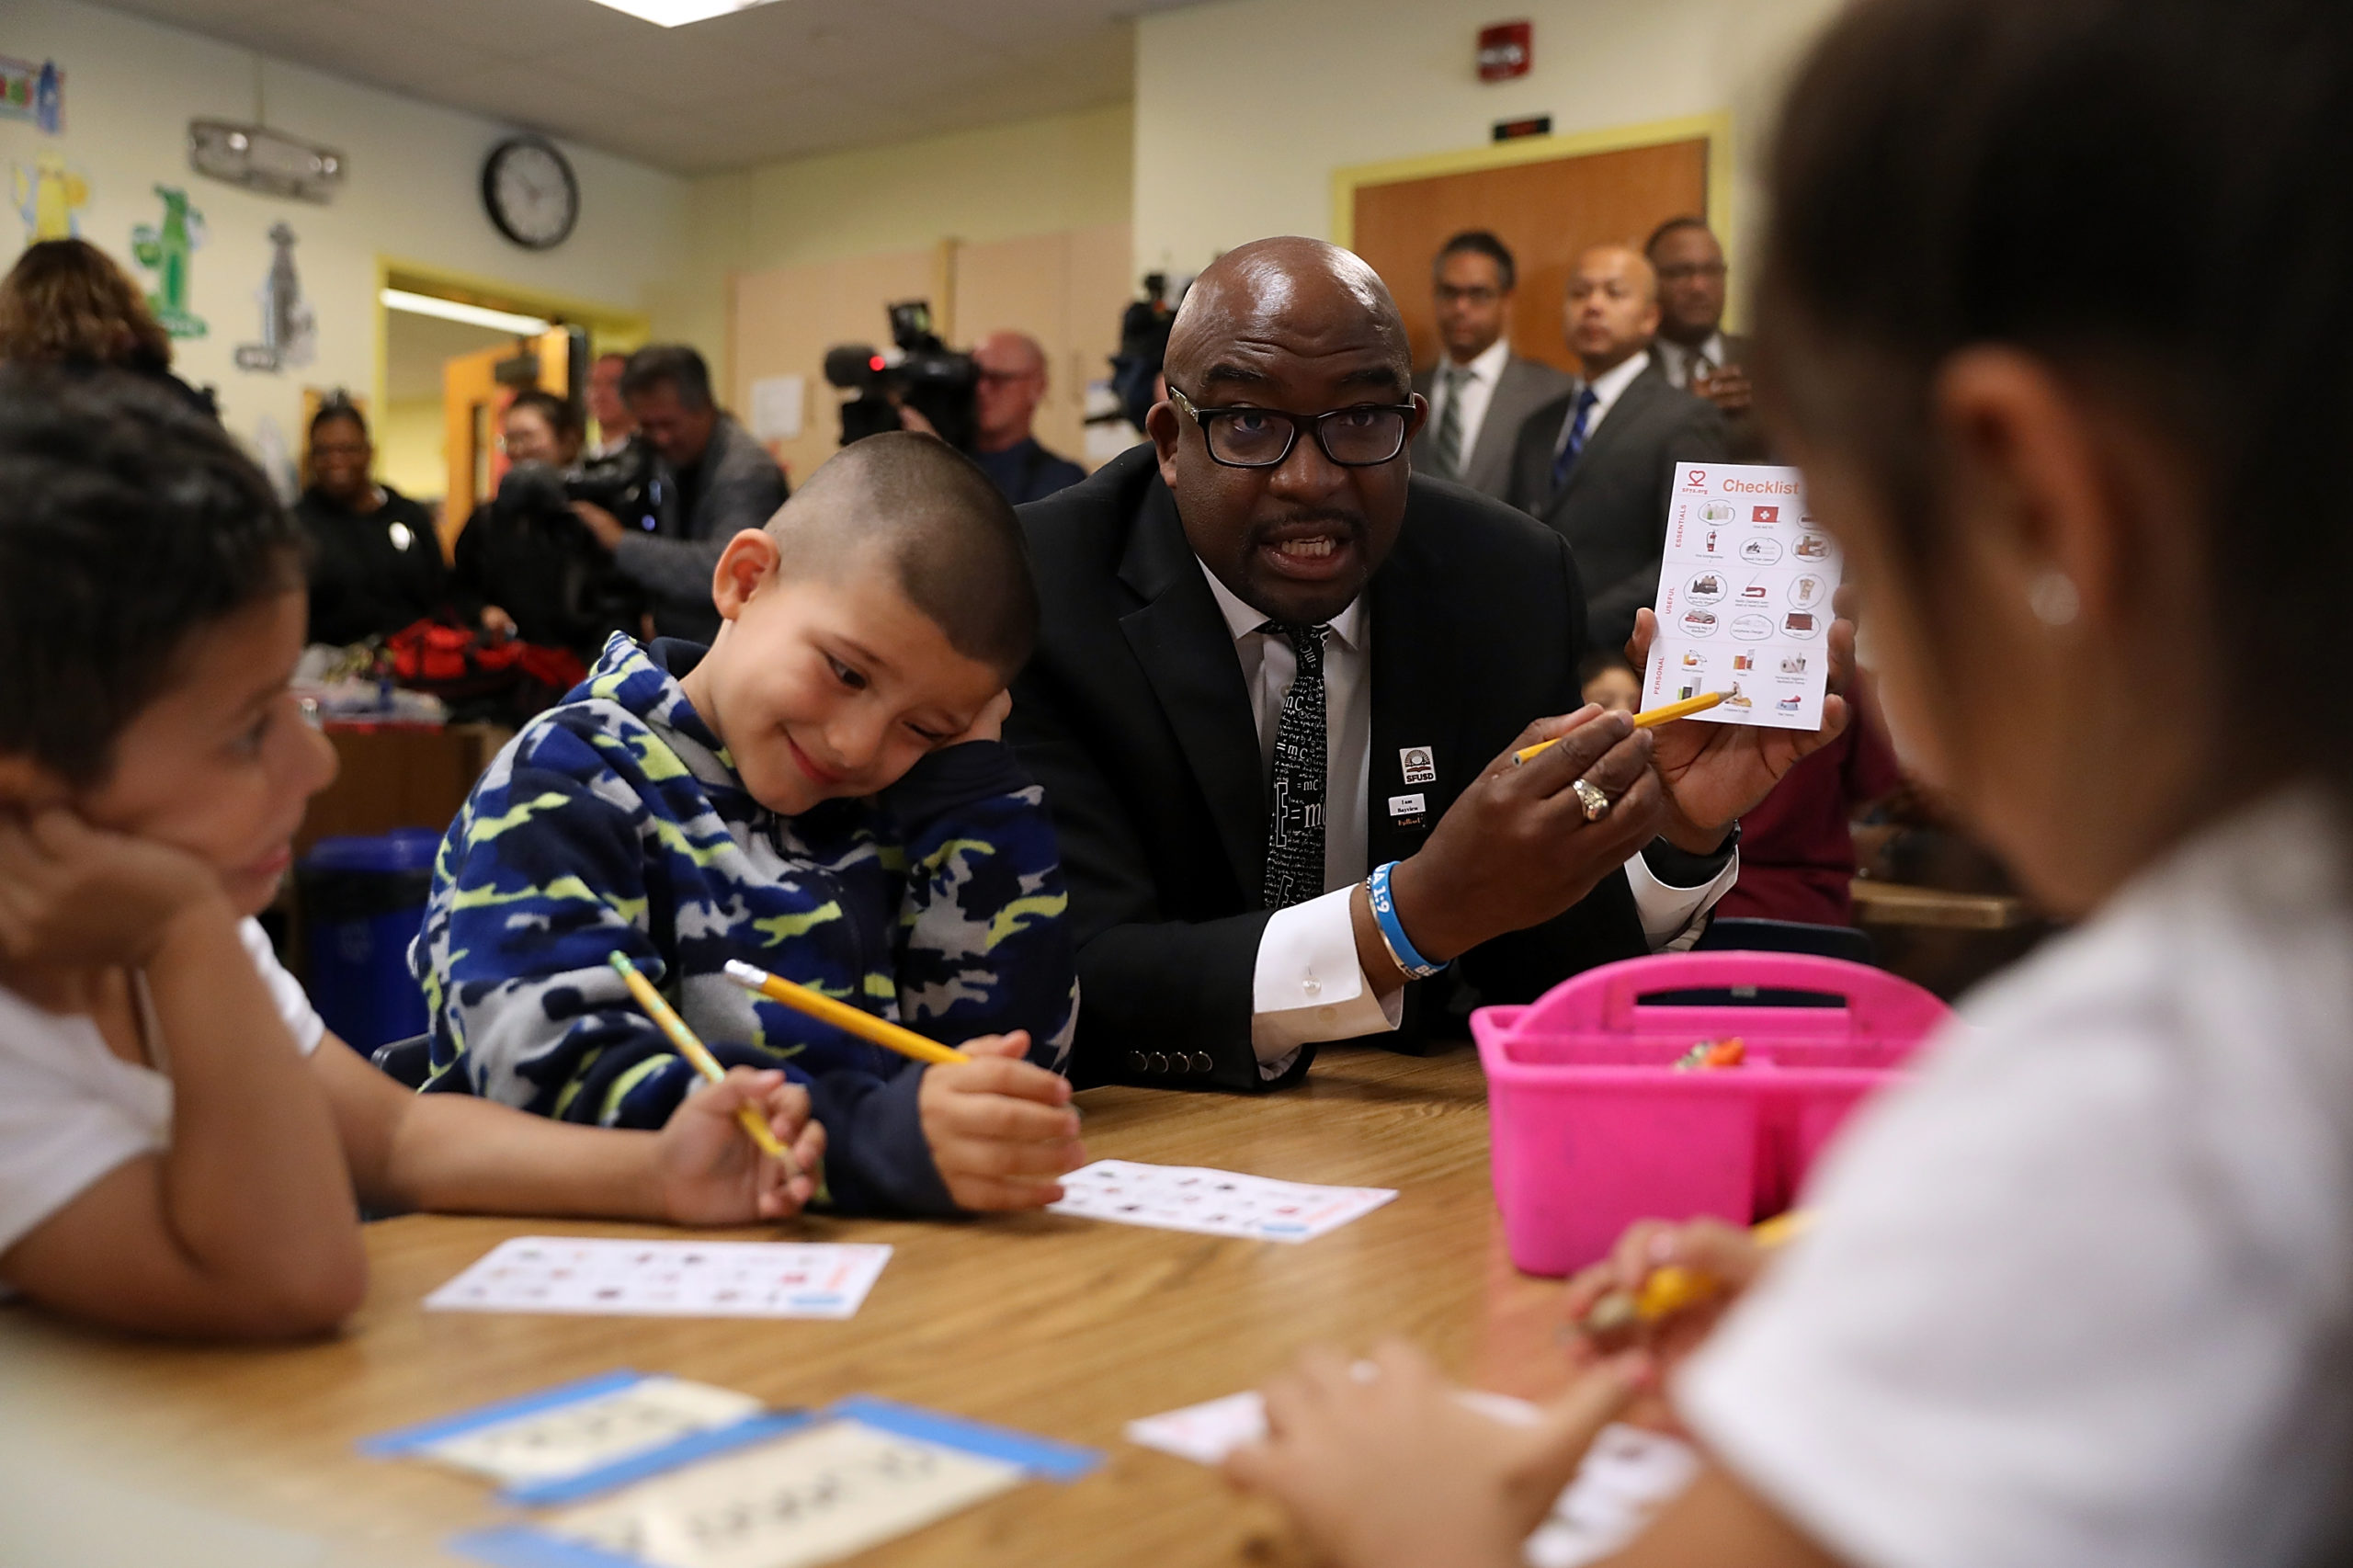 San Francisco Unified School District superintendent Dr. Vincent Matthews (C) reviews supplies that are needed after an earthquake occurs with students at Bryant Elementary School during a Great ShakeOut event on October 18, 2018 in San Francisco, California. Millions of people around the world participated in Great ShakeOut Earthquake drills to practice how to drop, cover and hold on in the event of an earthquake. (Photo by Justin Sullivan/Getty Images)